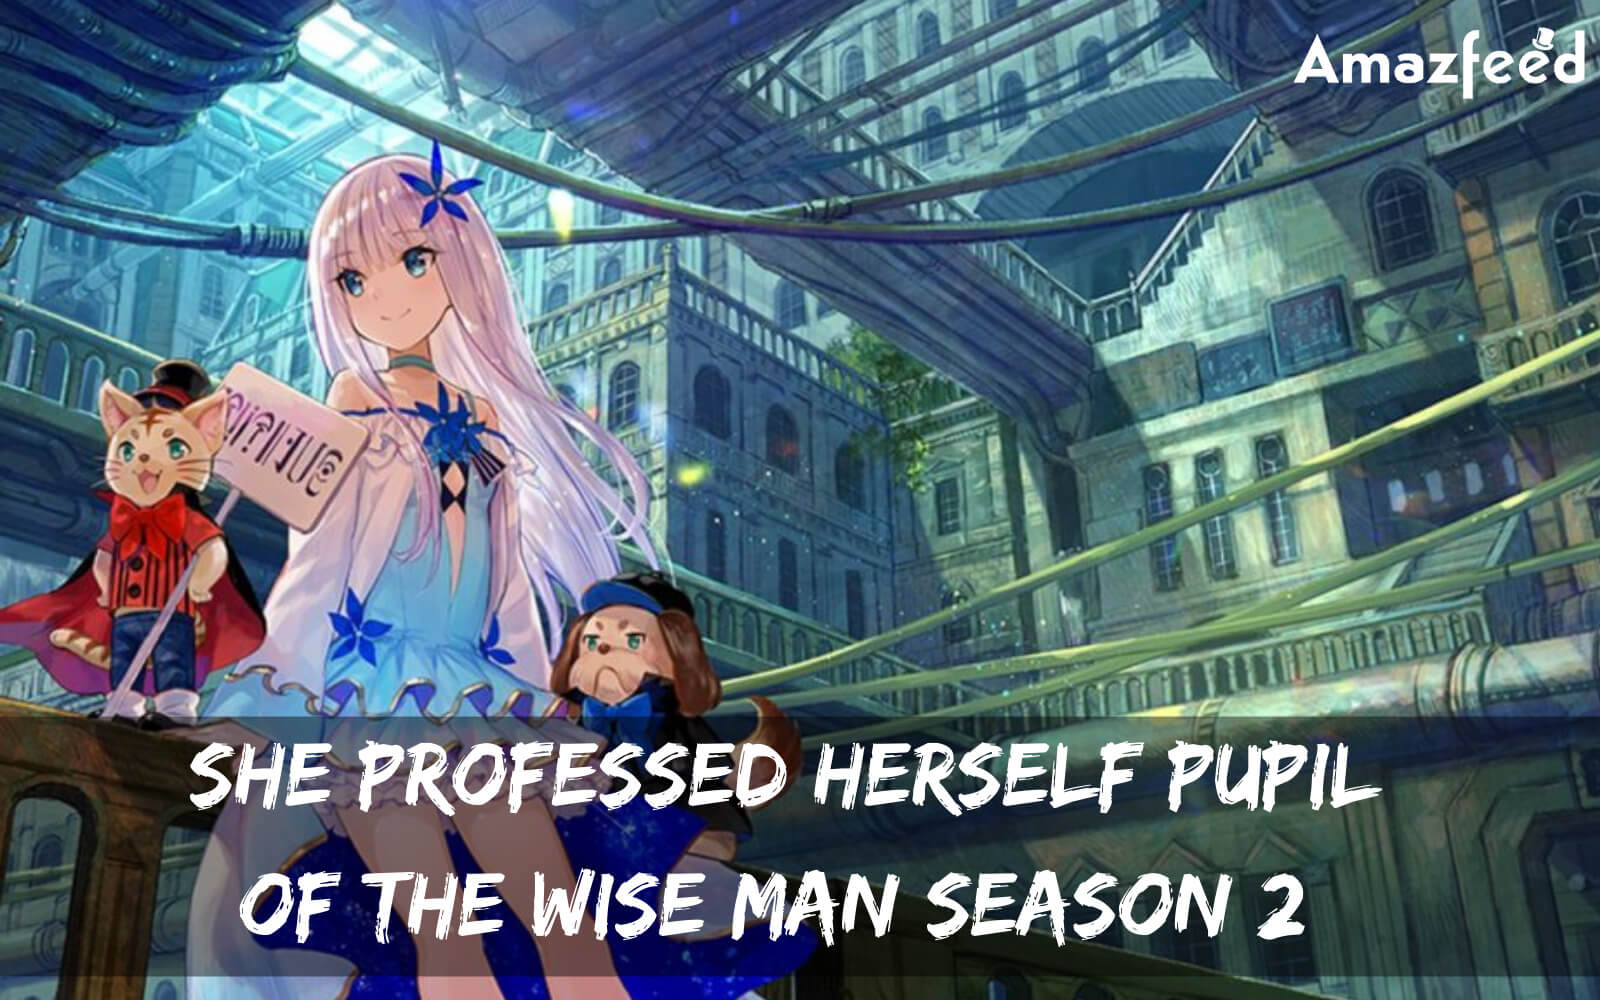 Mira, She Professed Herself Pupil of the Wise Man Wiki